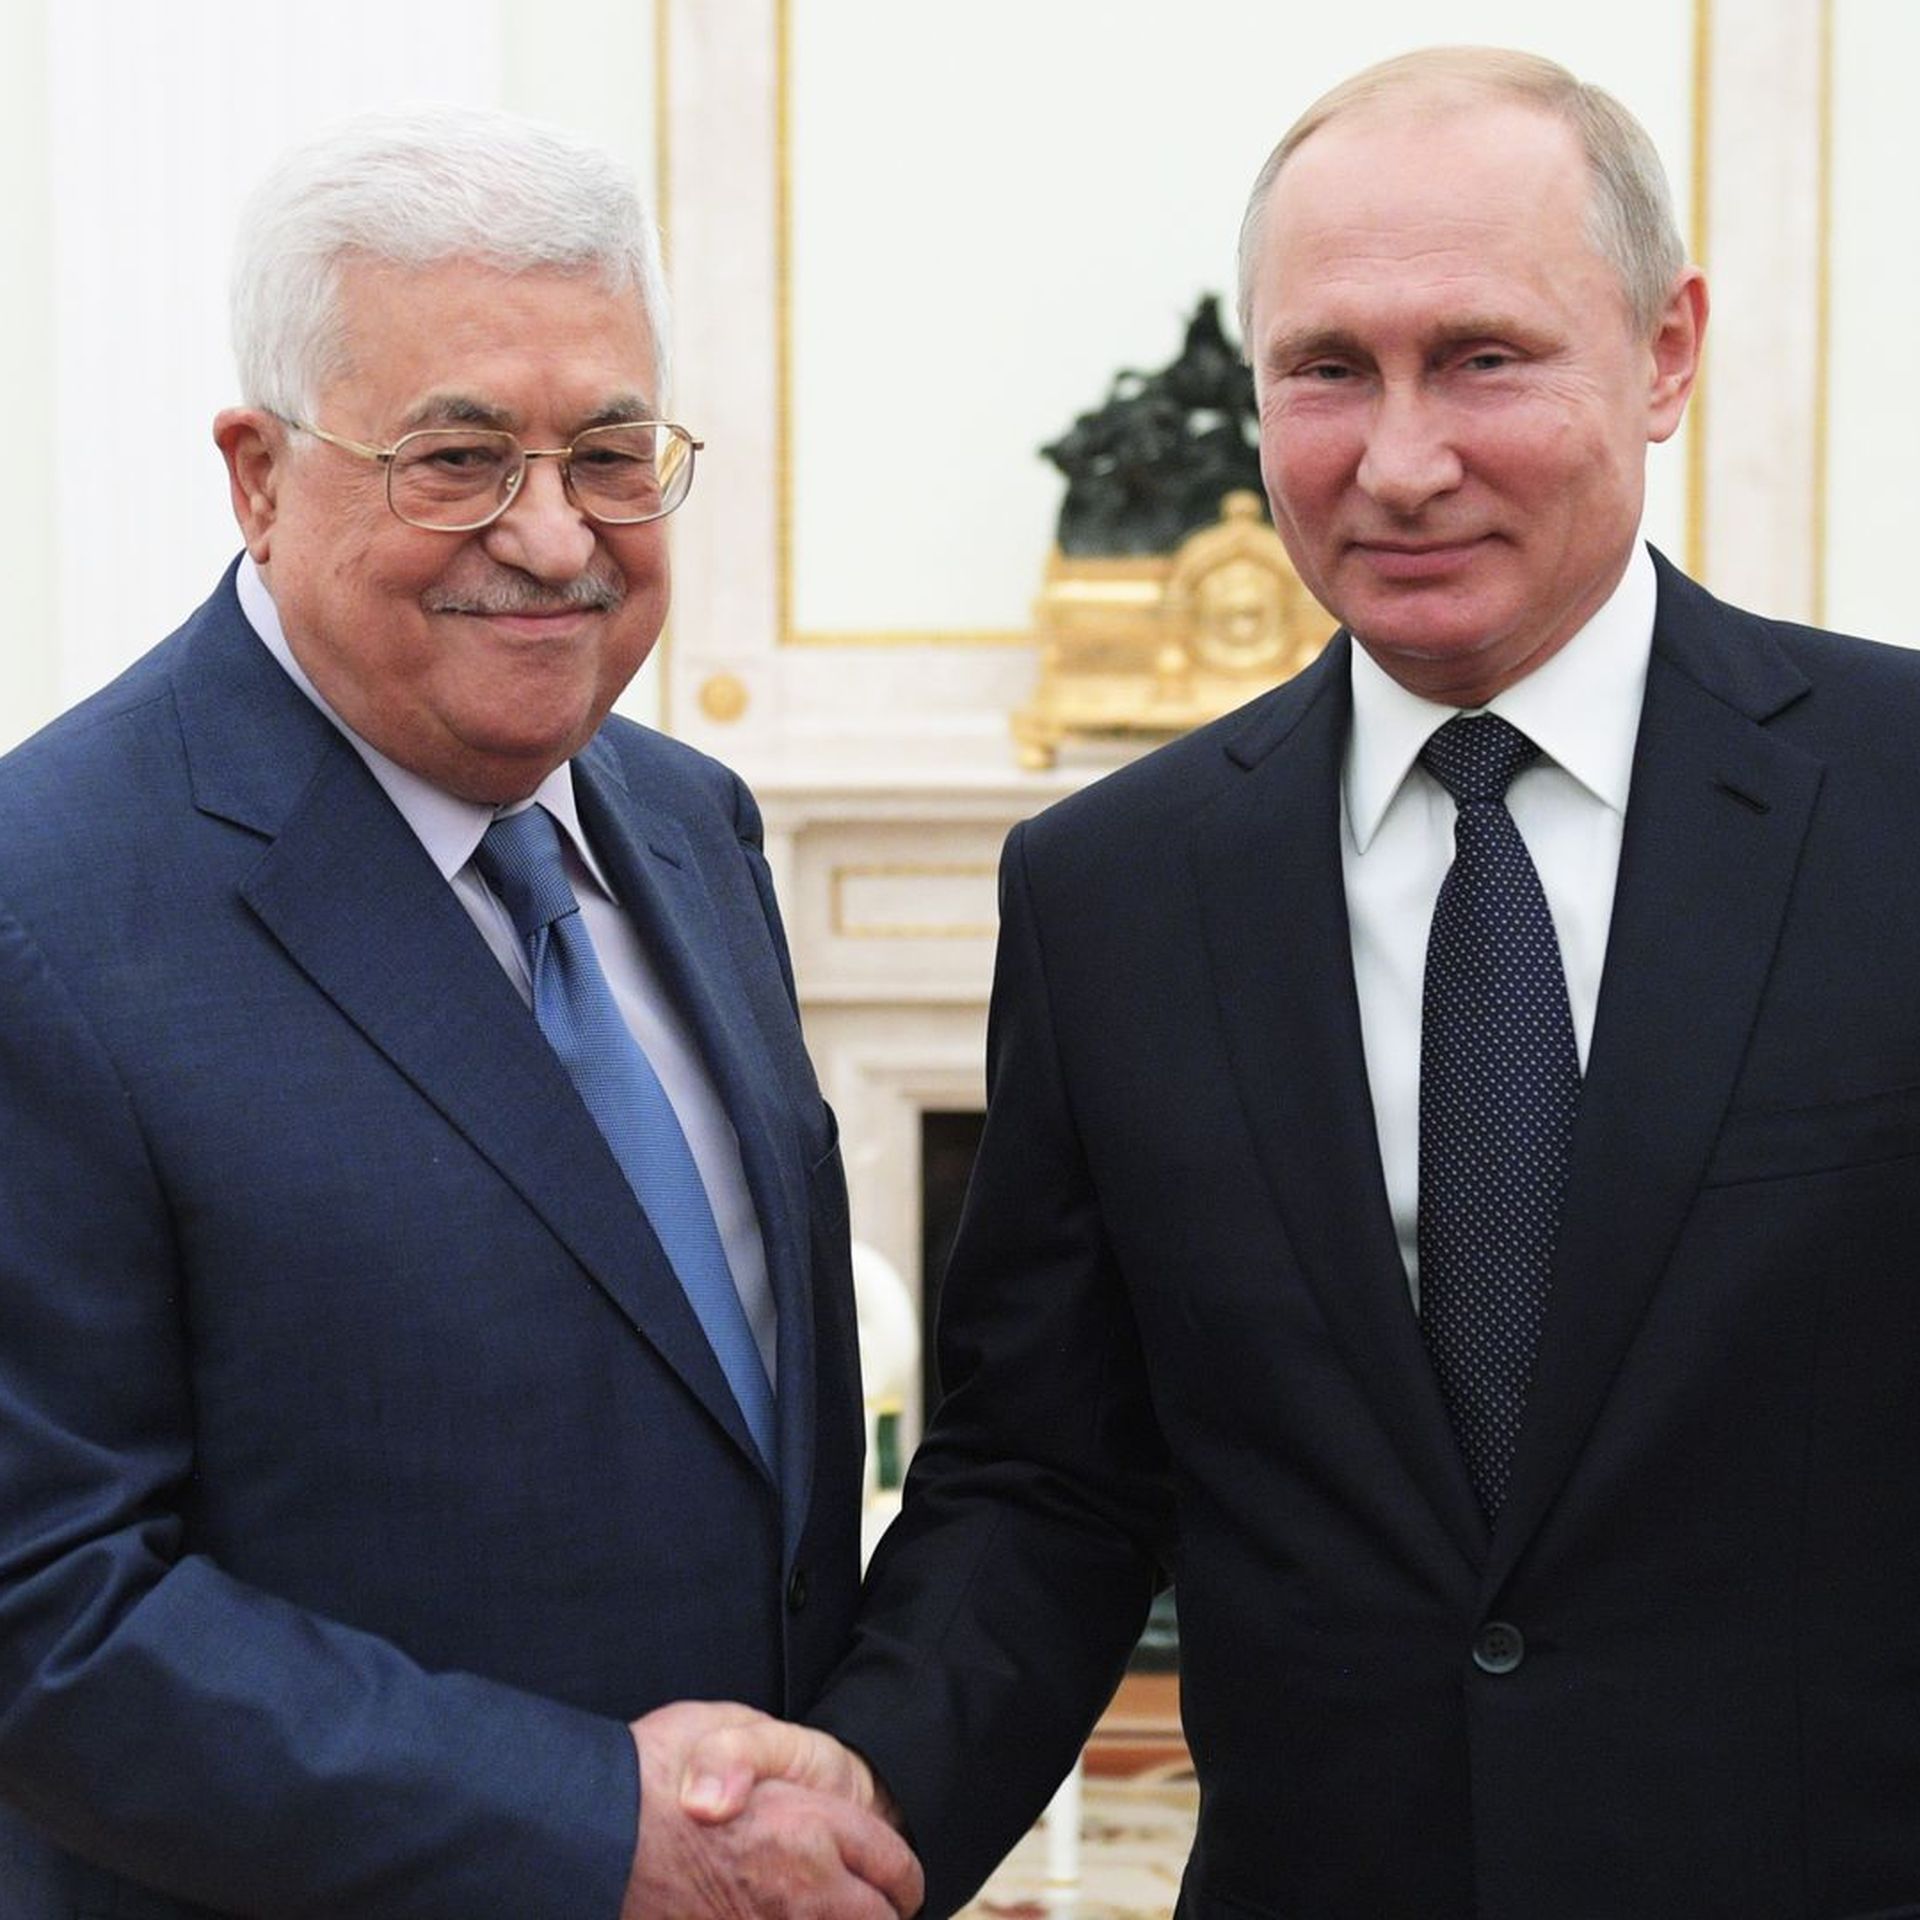 Palestinian President Mahmoud Abbas and Russian President Vladimir Putin shake hands during a meeting in Moscow in 2018. Photo: Alexei Druzhinin\TASS via Getty Images